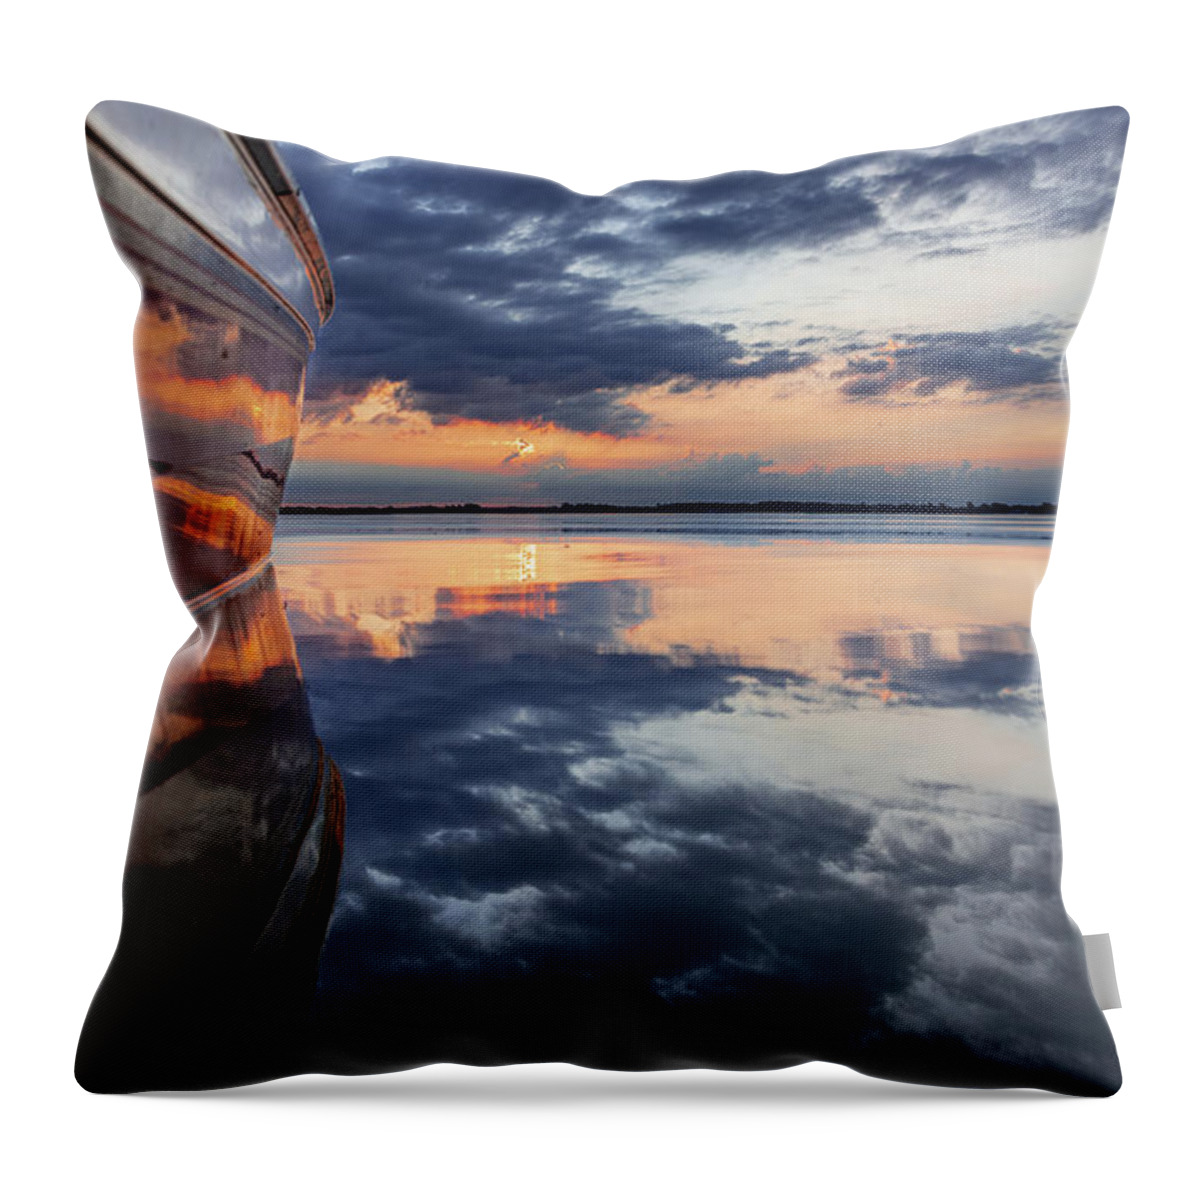  Throw Pillow featuring the photograph Reflective Sunrise by Brian Jones